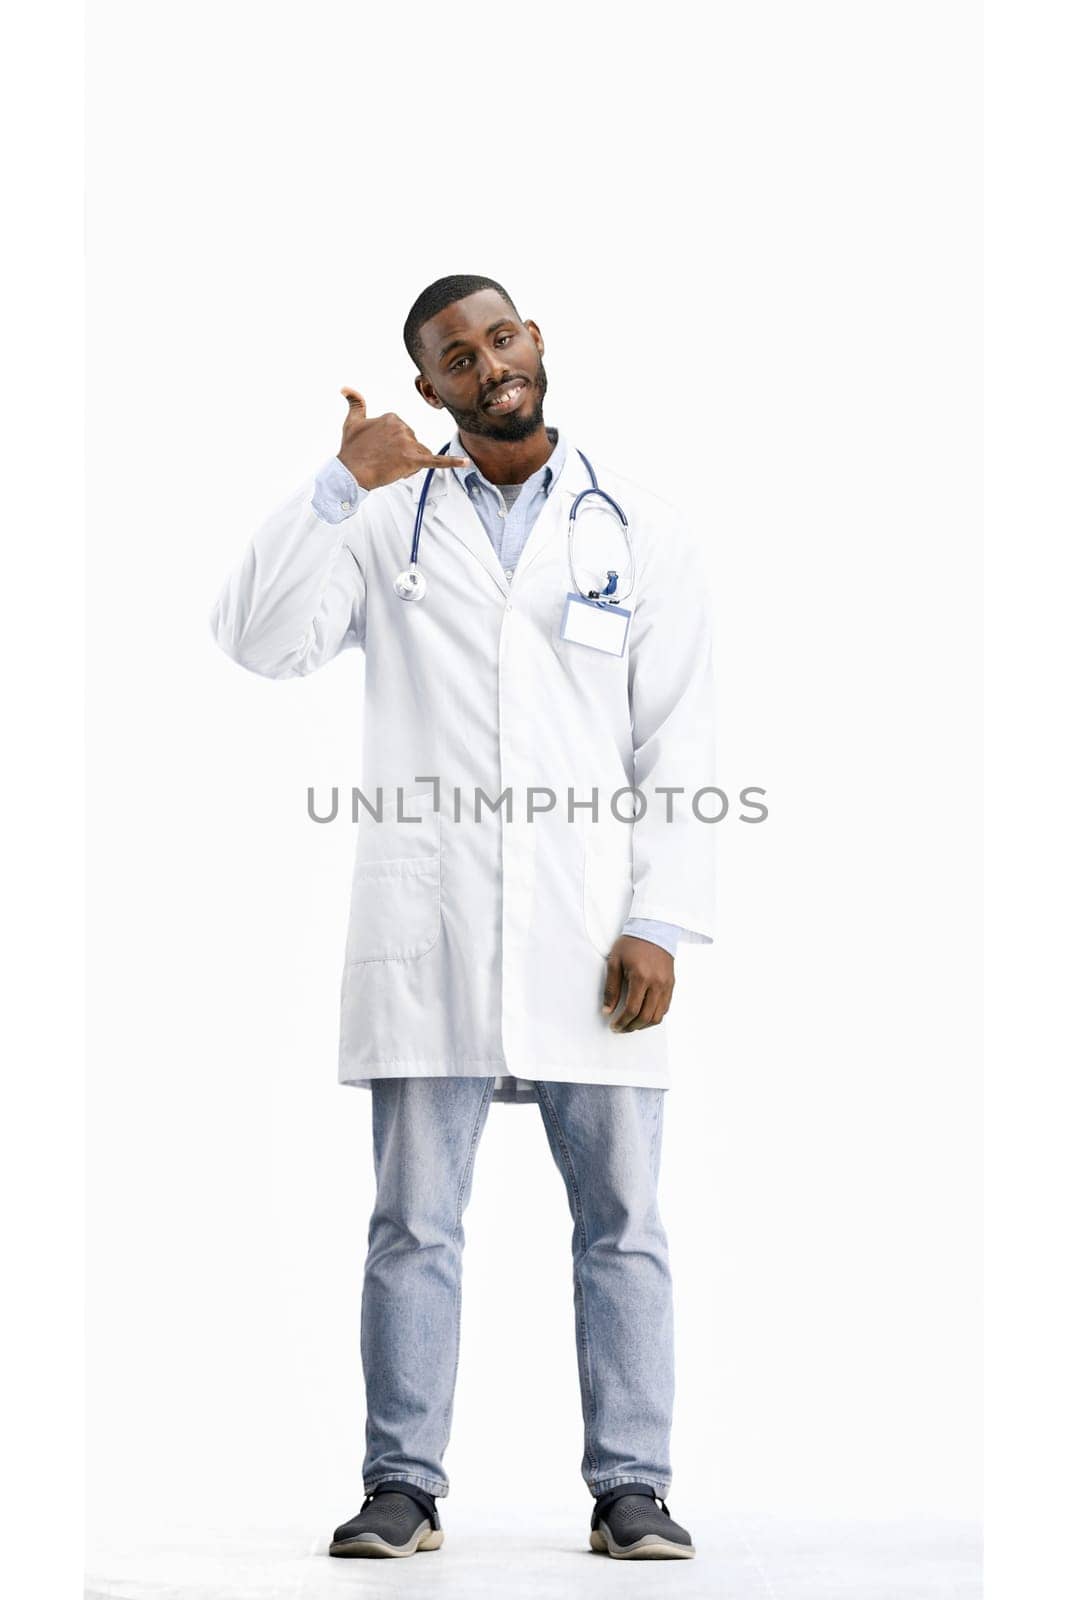 The doctor, in full height, on a white background, shows a call sign by Prosto